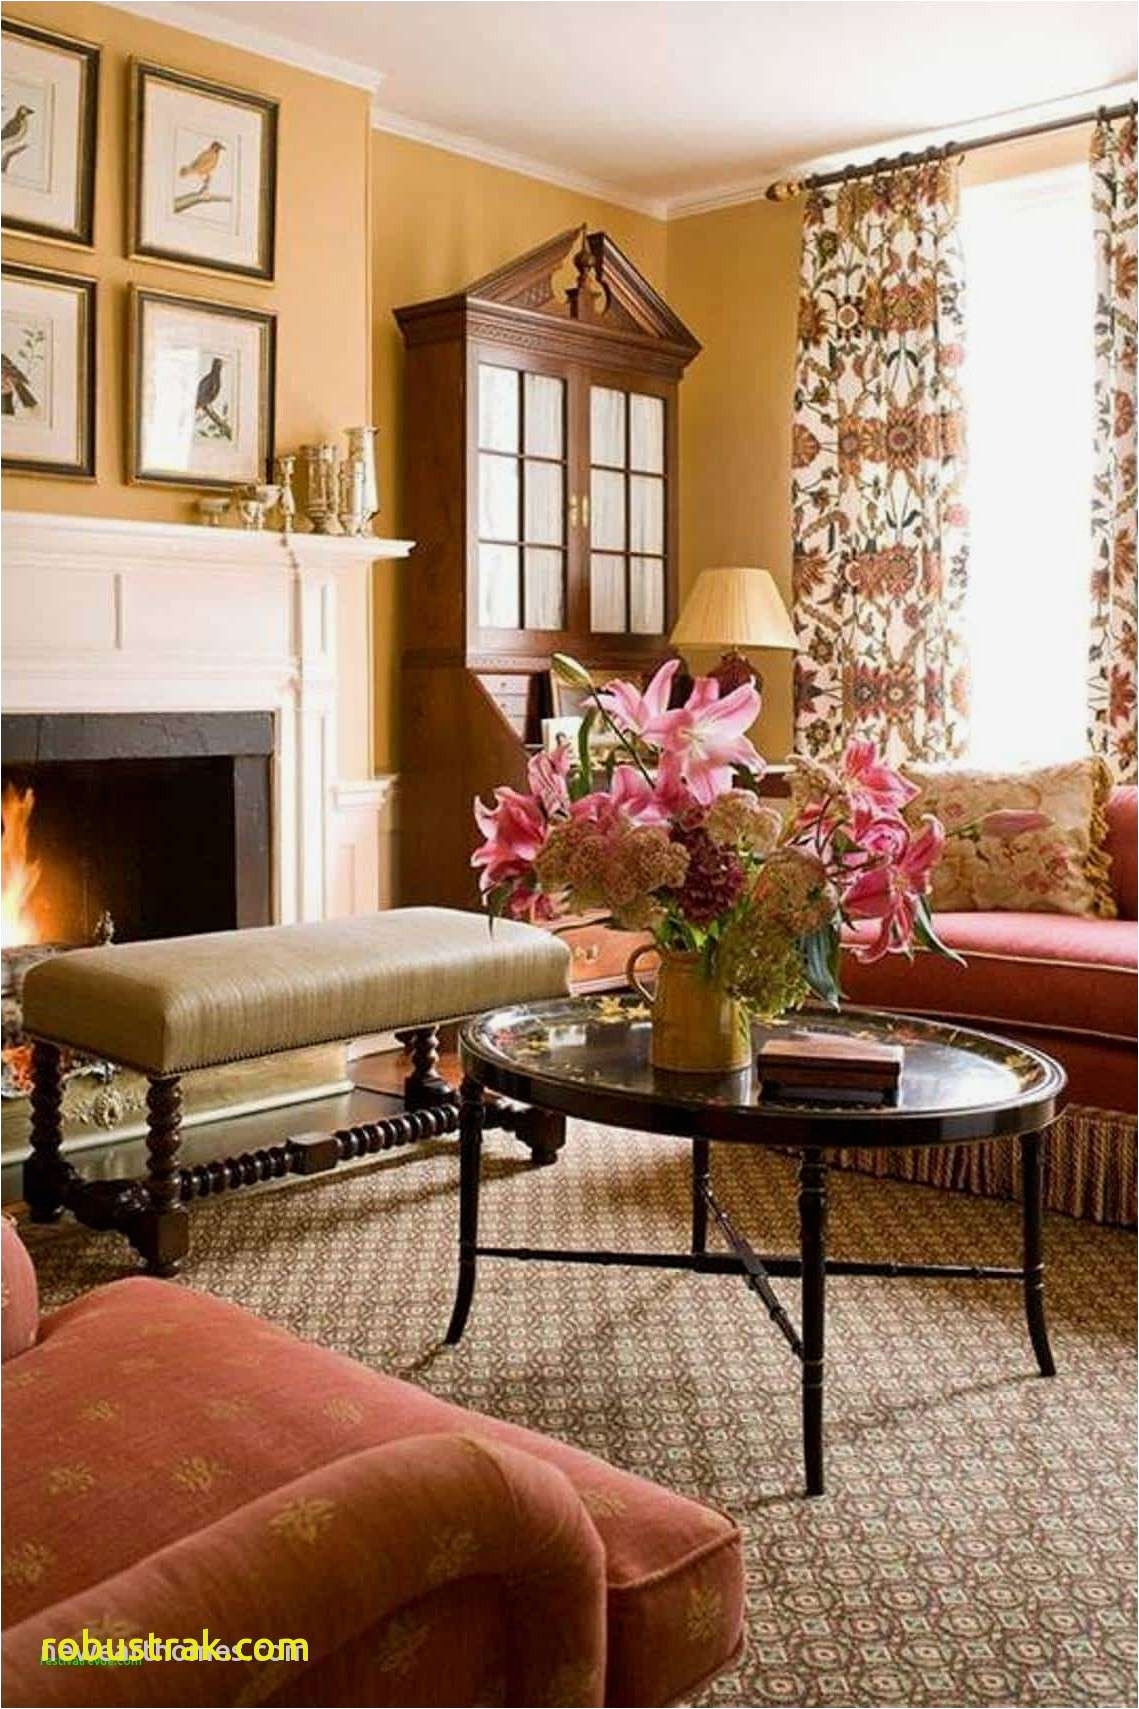 family room furniture ideas unique 35 beautiful living furniture ideas graphics photograph of 47 fresh family